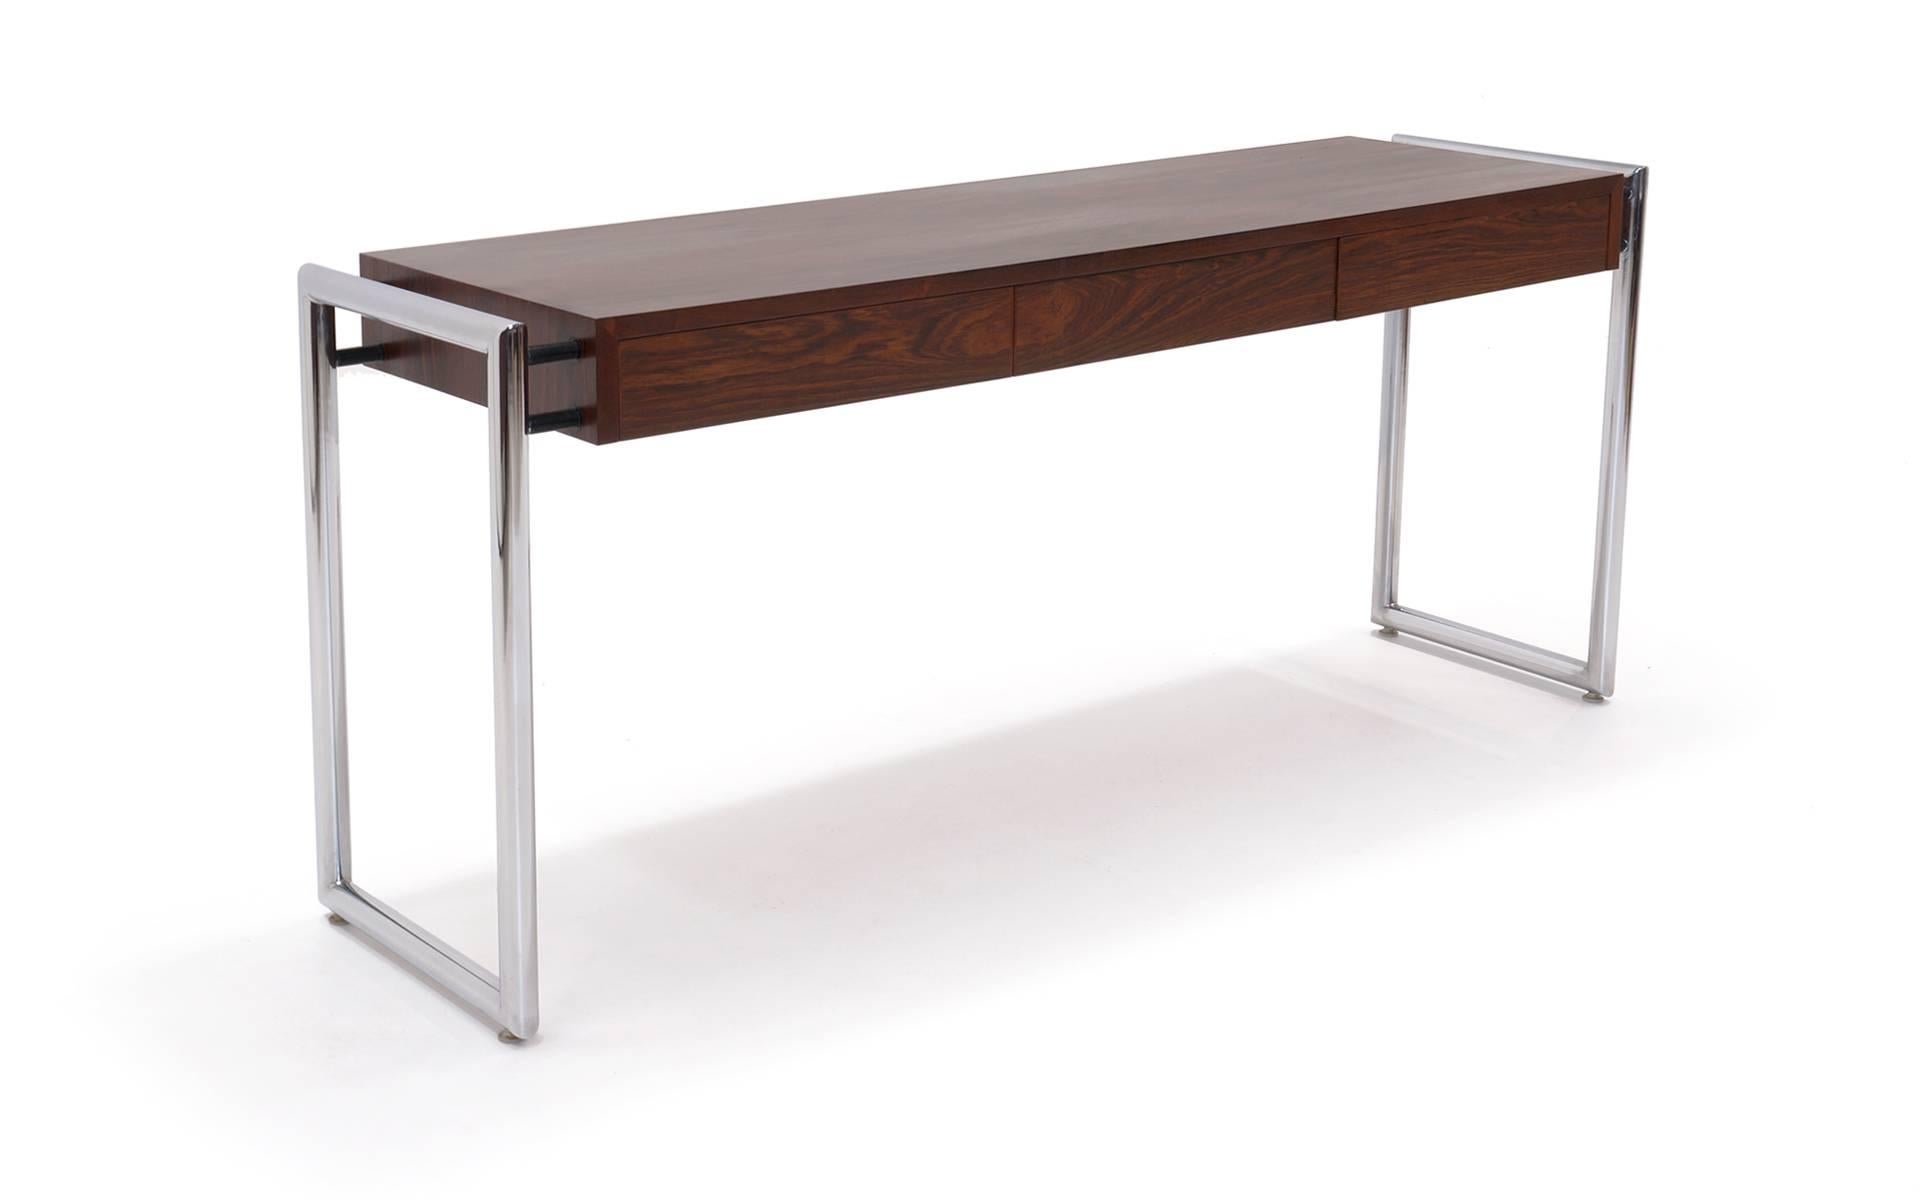 Long and sleek, this beautifully patterned Brazilian rosewood desk is a rare design by Milo Baughman. A tubular chromed steel rectangular frame attaches with horizontal threaded members so the three drawer desk floats within the frame.